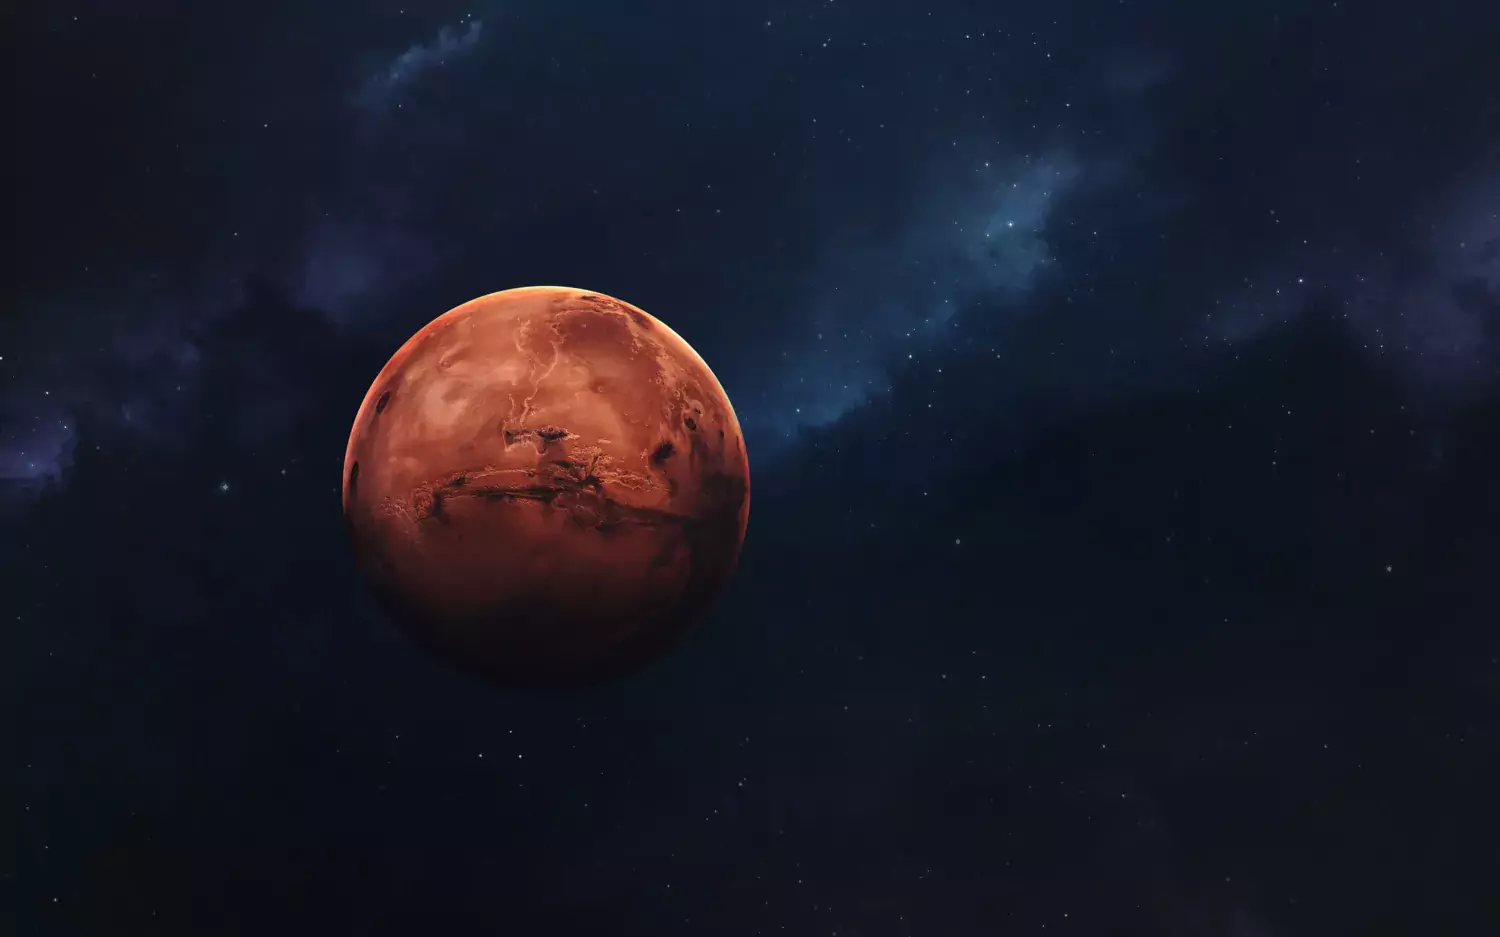 Illustration of planet Mars from a distance out in space.